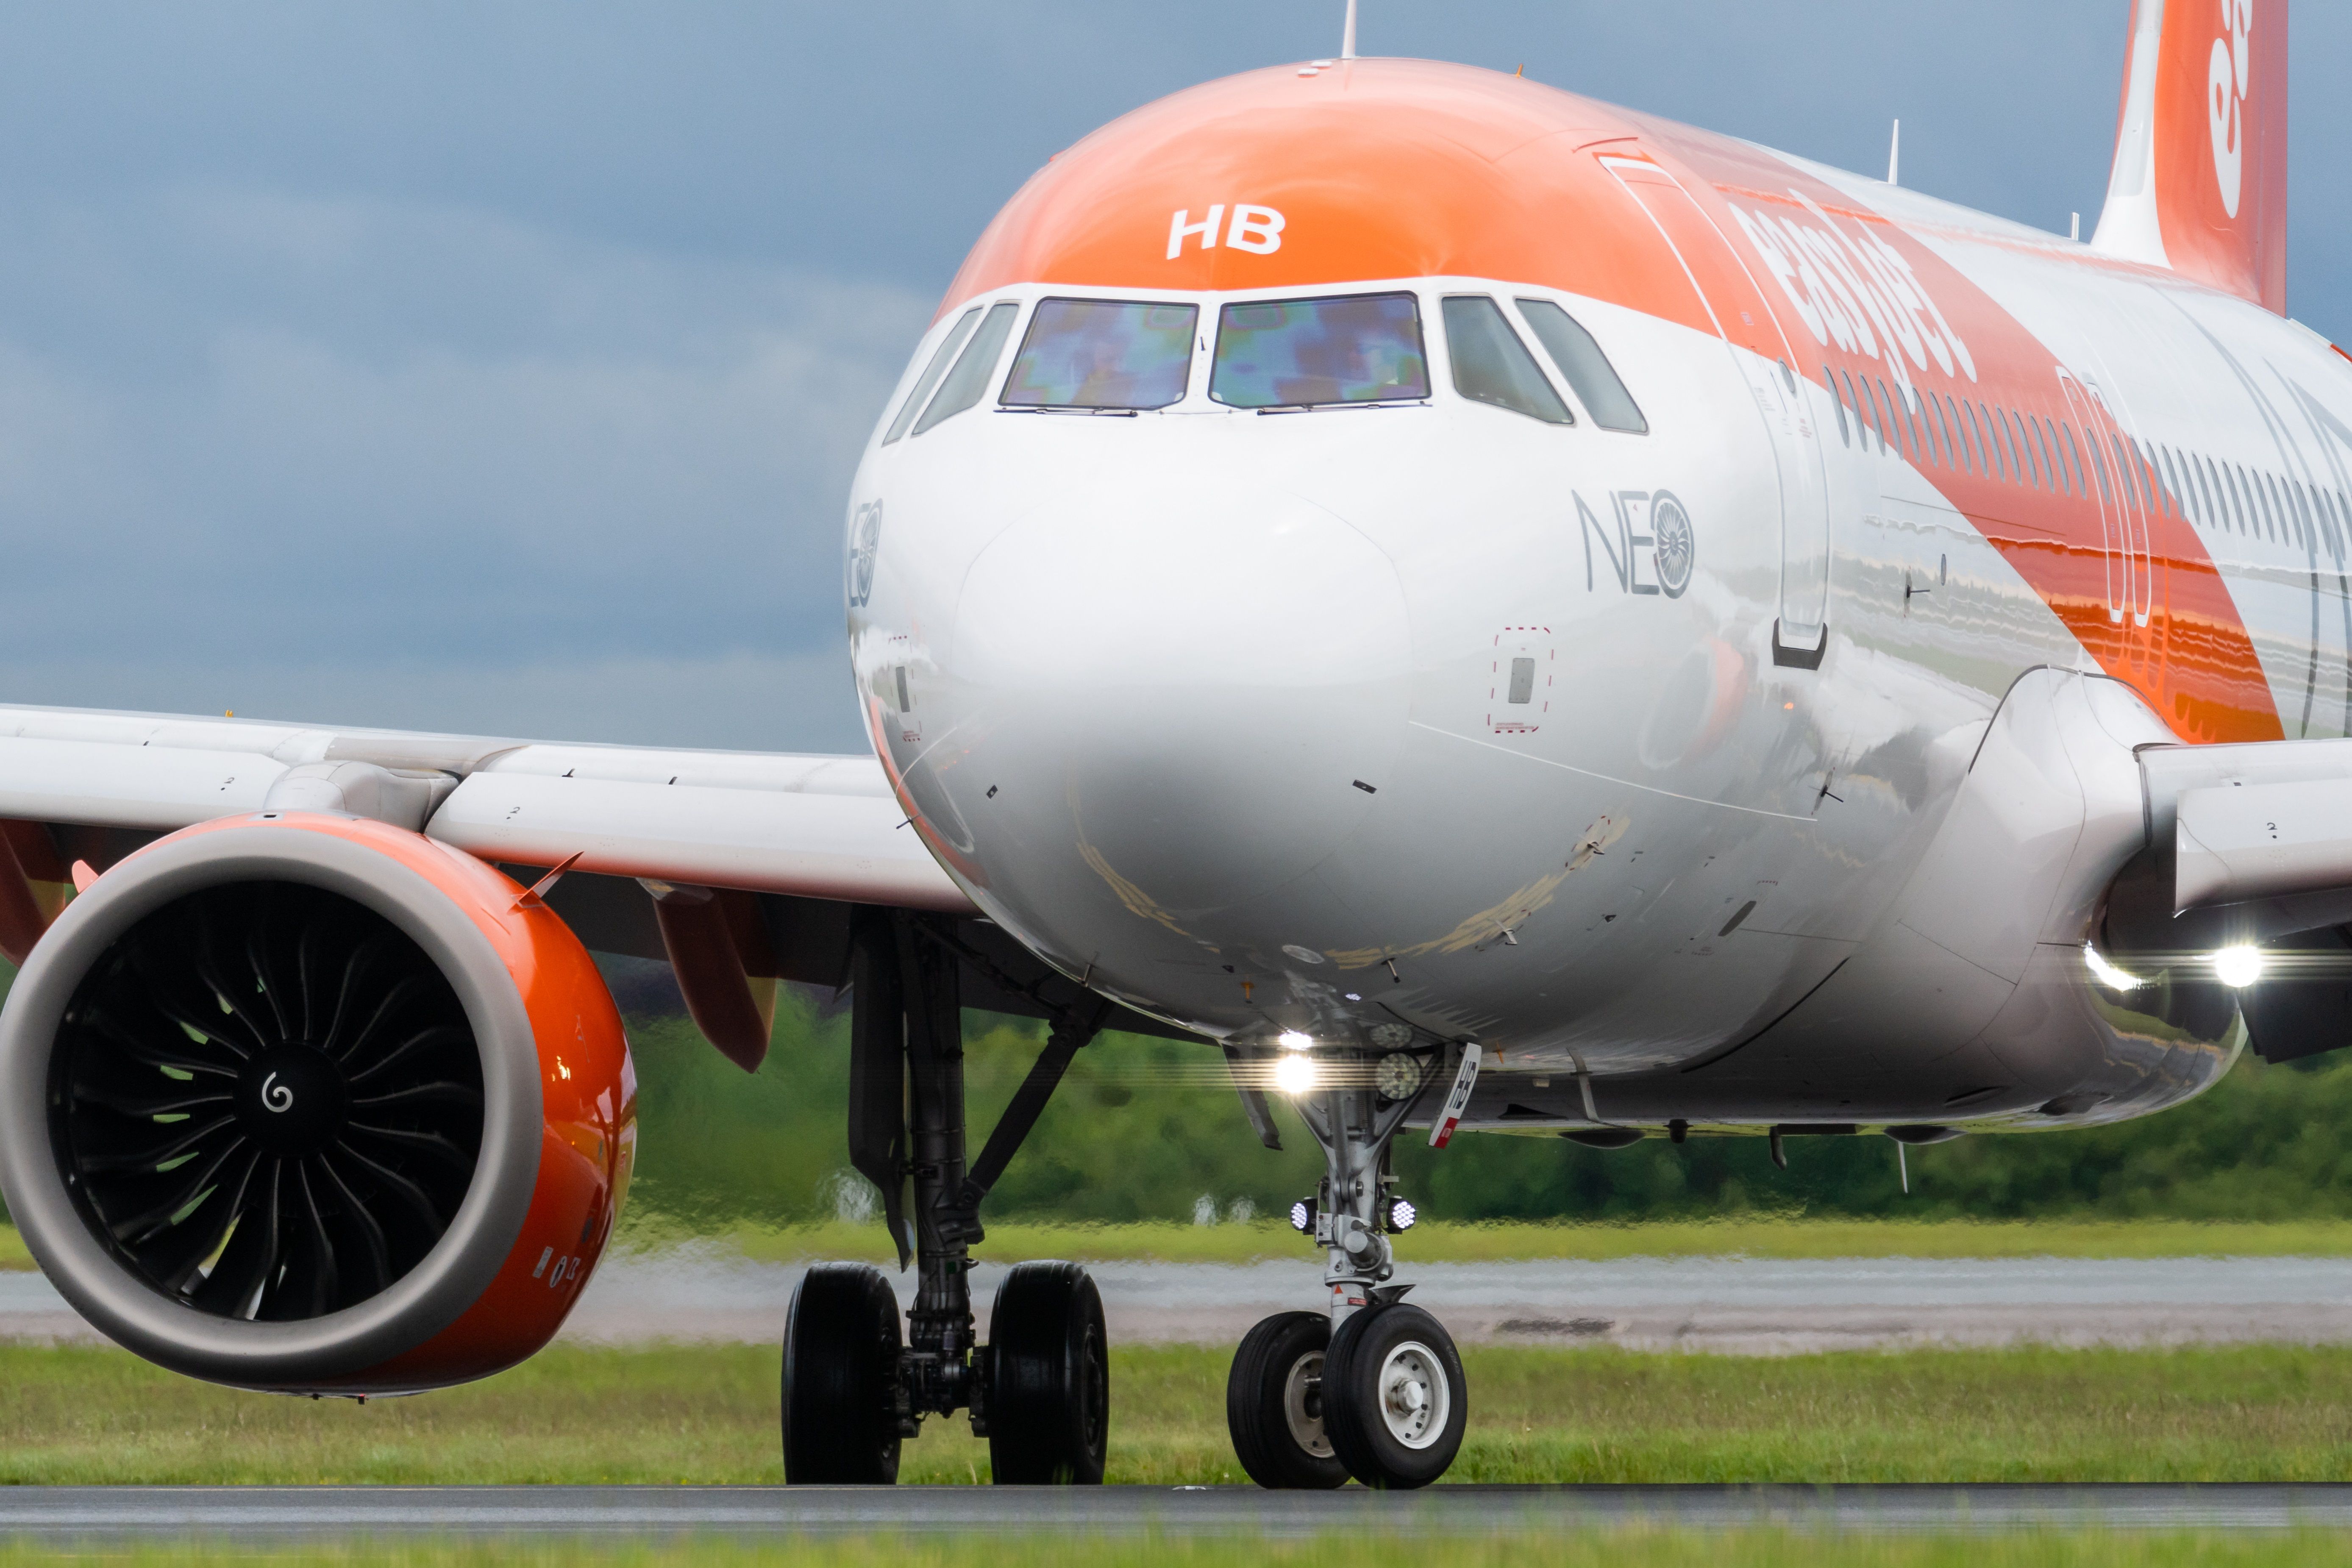 An easyJet A320 on the taxiway.